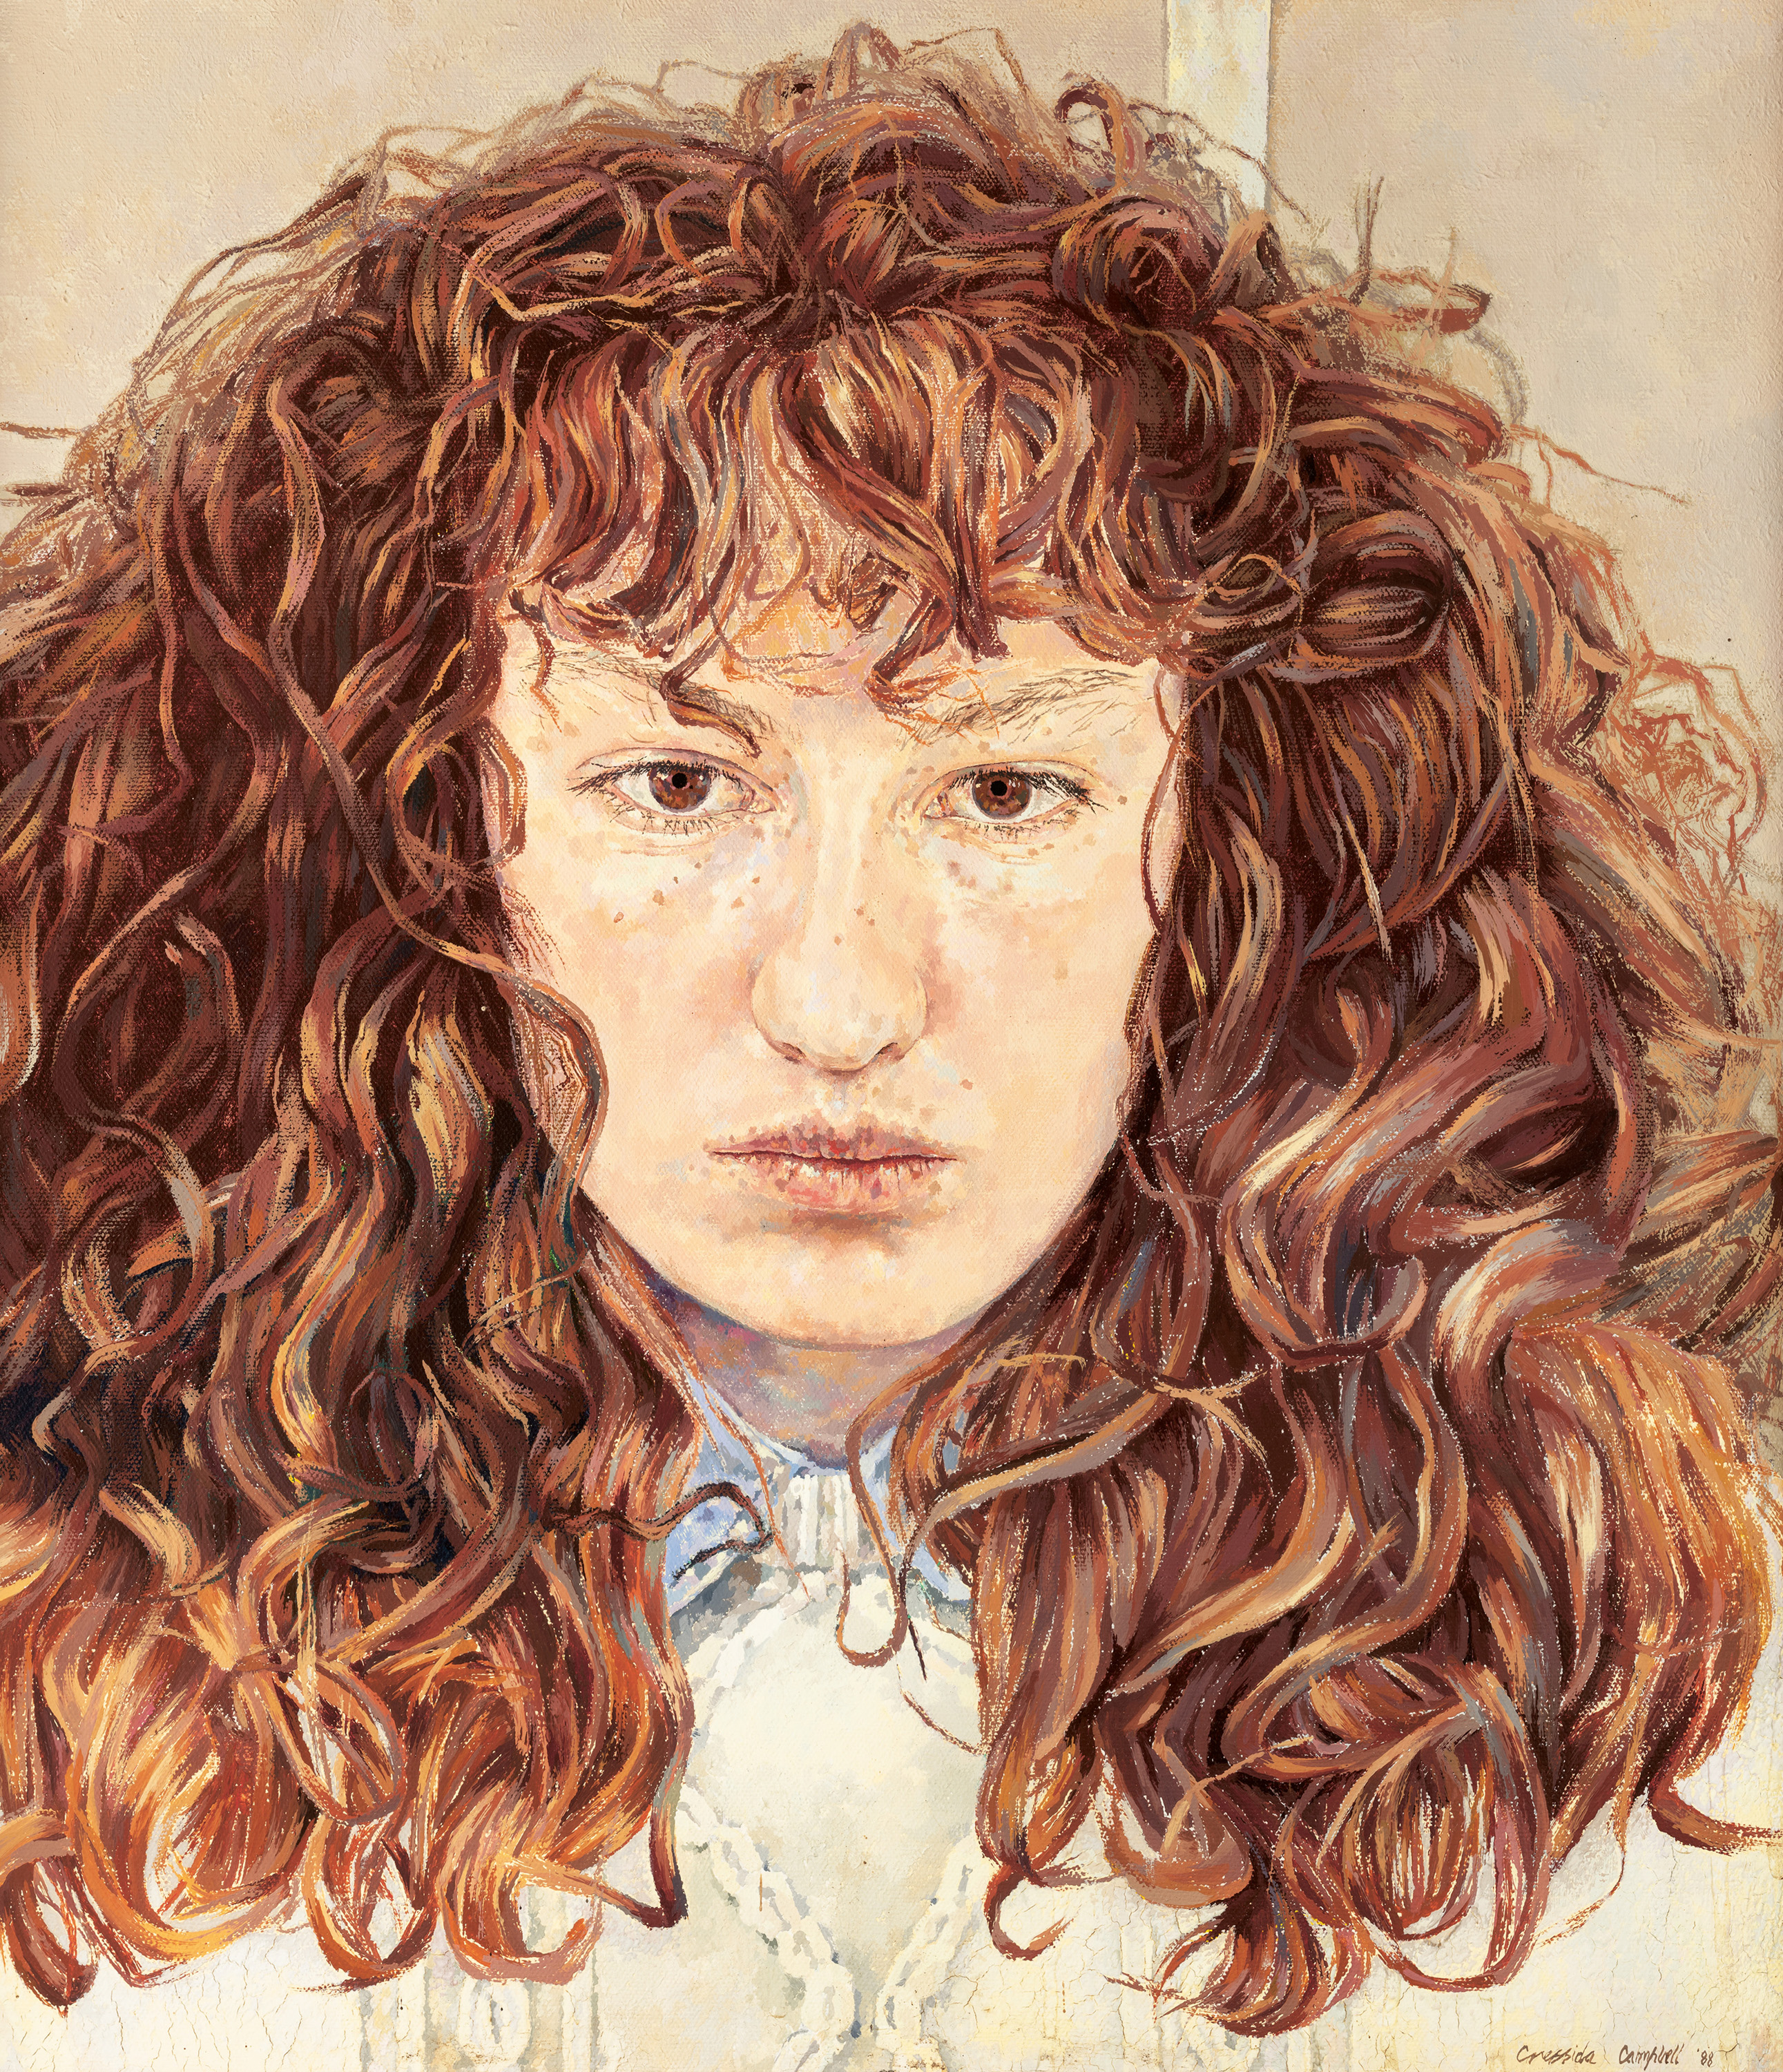 A painting of a woman in her 20s, with a stern expression. She has bushy brown hair and a fringe, and brown eyes.